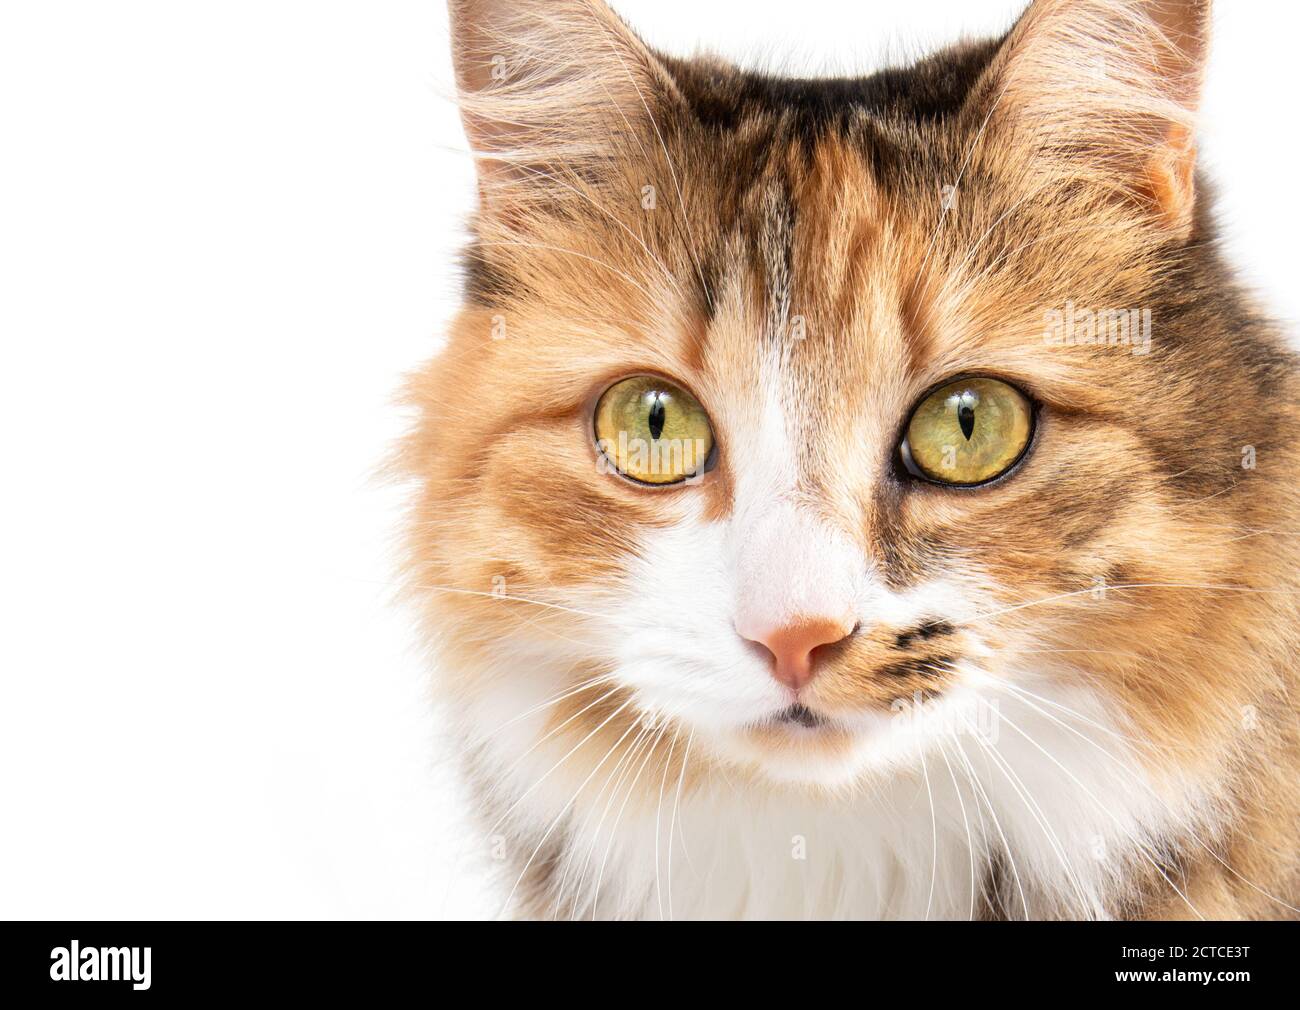 Adorable cat head portrait. Front view. Multicolored (torbie) long hair fluffy female cat with incredible markings and striking yellow eyes. Stock Photo